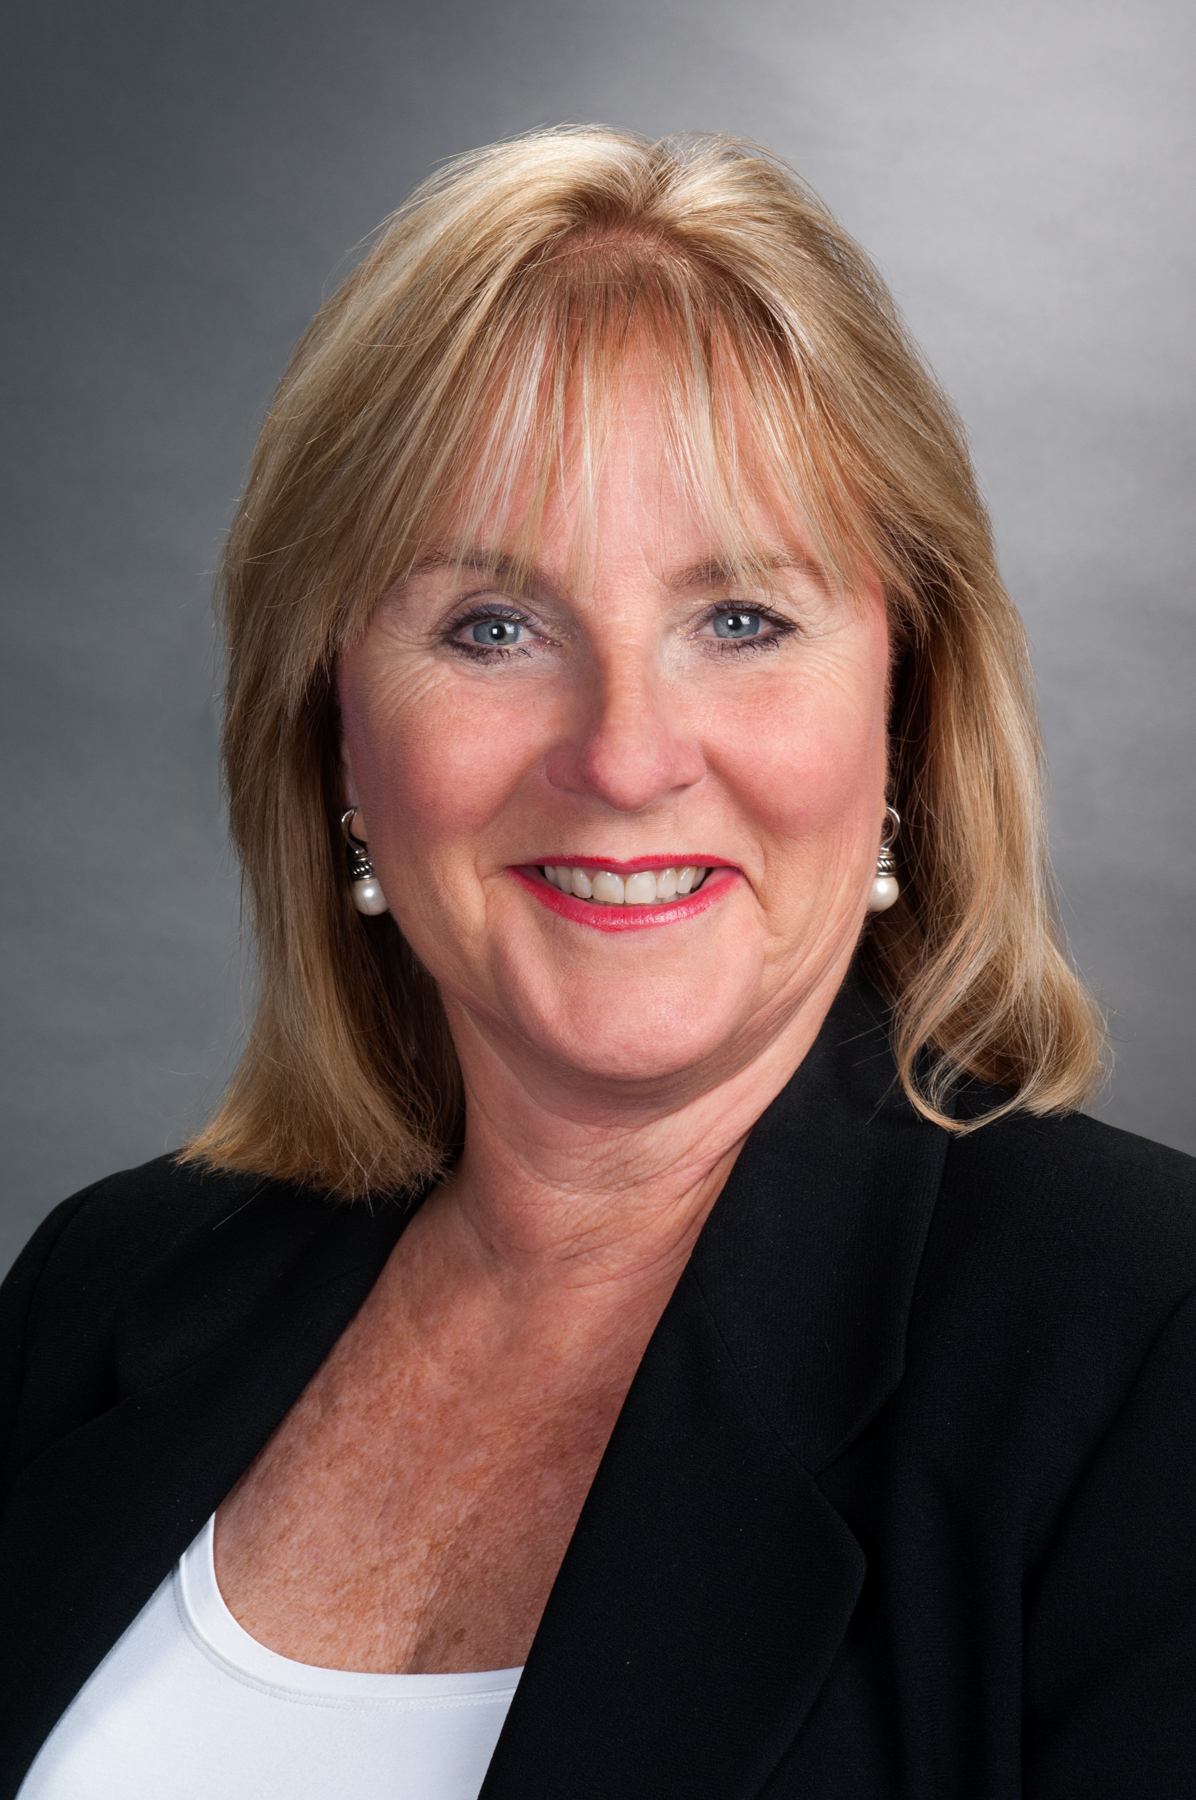 Michele Vogel was hired by Wilmington Trust as senior private client advisor in the Florida market.